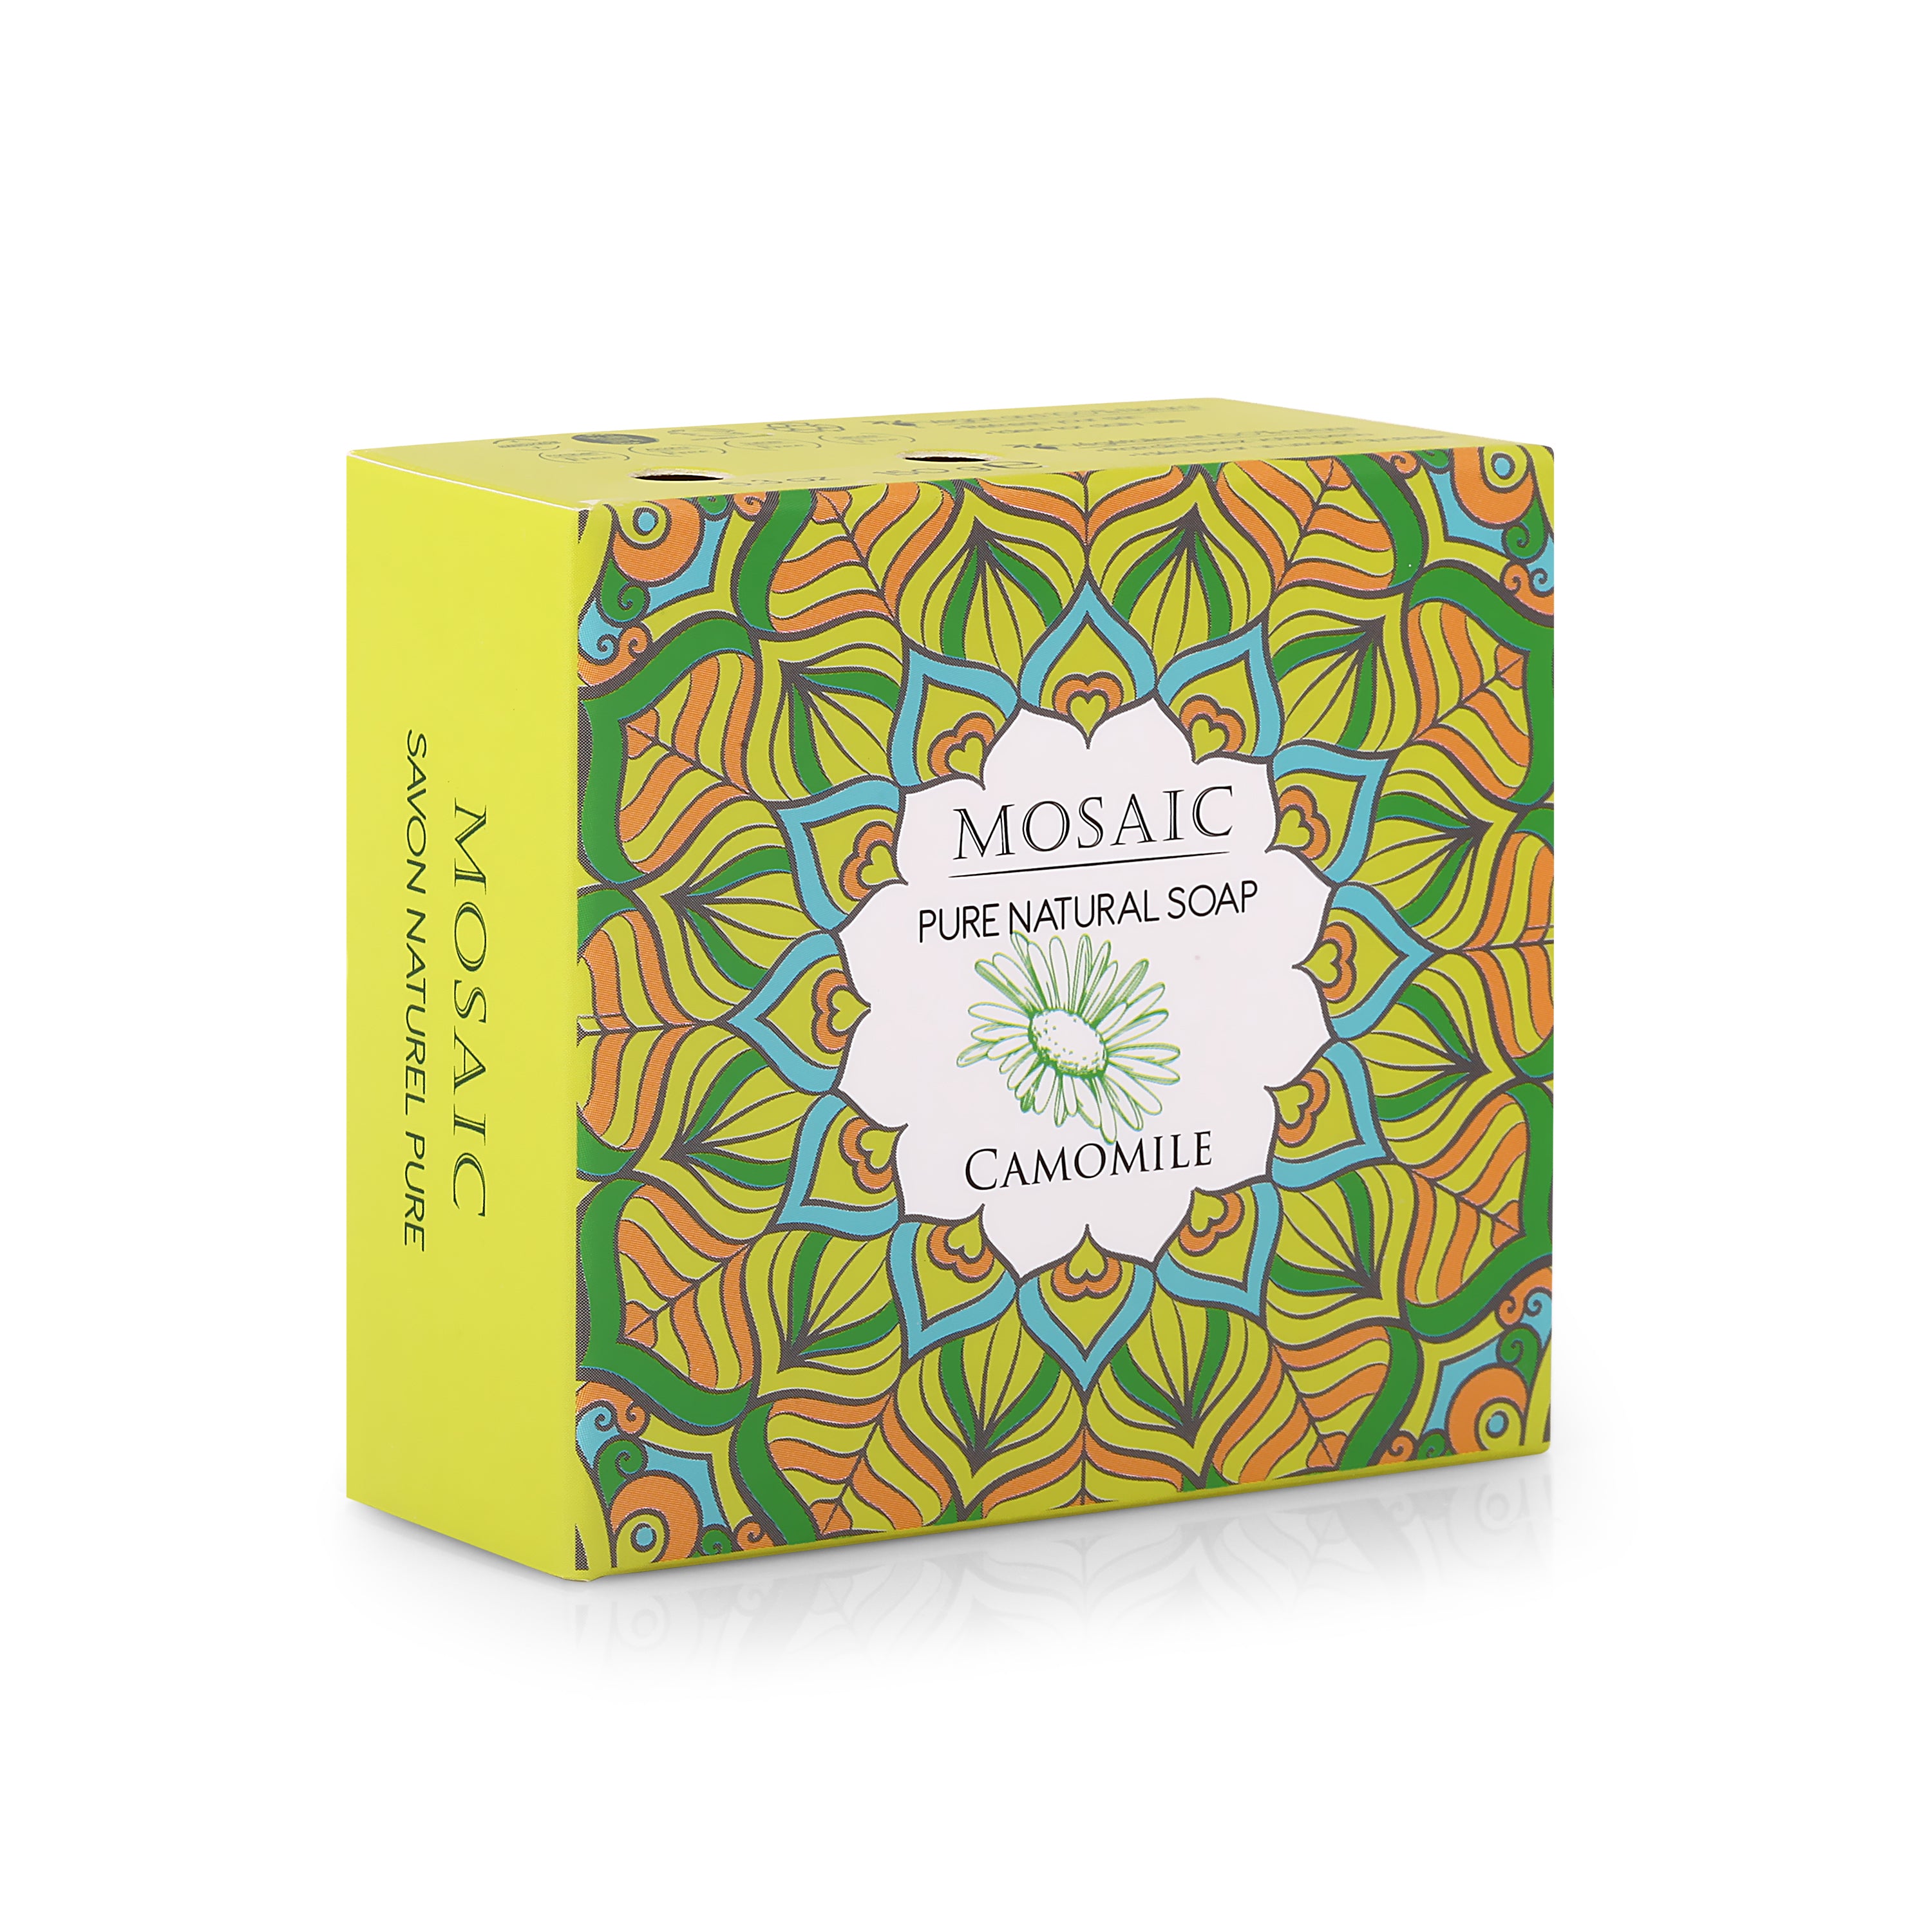 Camomile Beauty Soap with Olive Oil, 5.3 oz